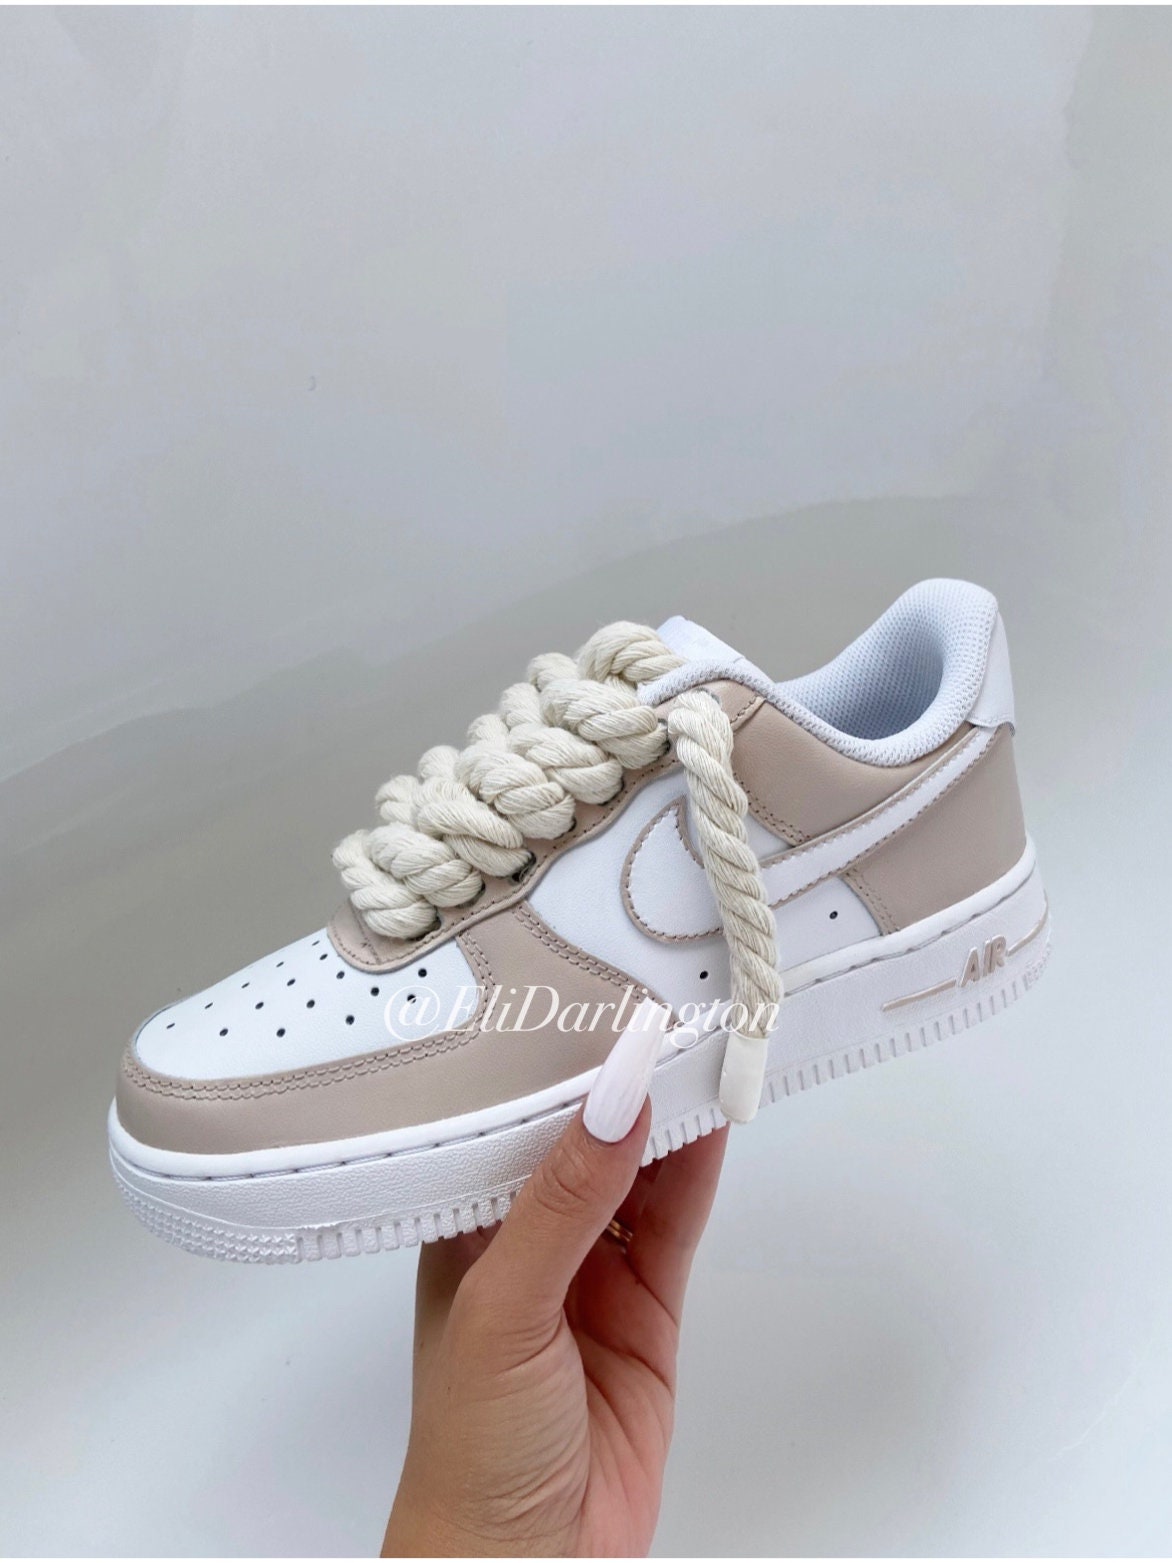 Custom Hand Painted Nike Air Force 1 Low 07 Sneakers With Rope - Etsy